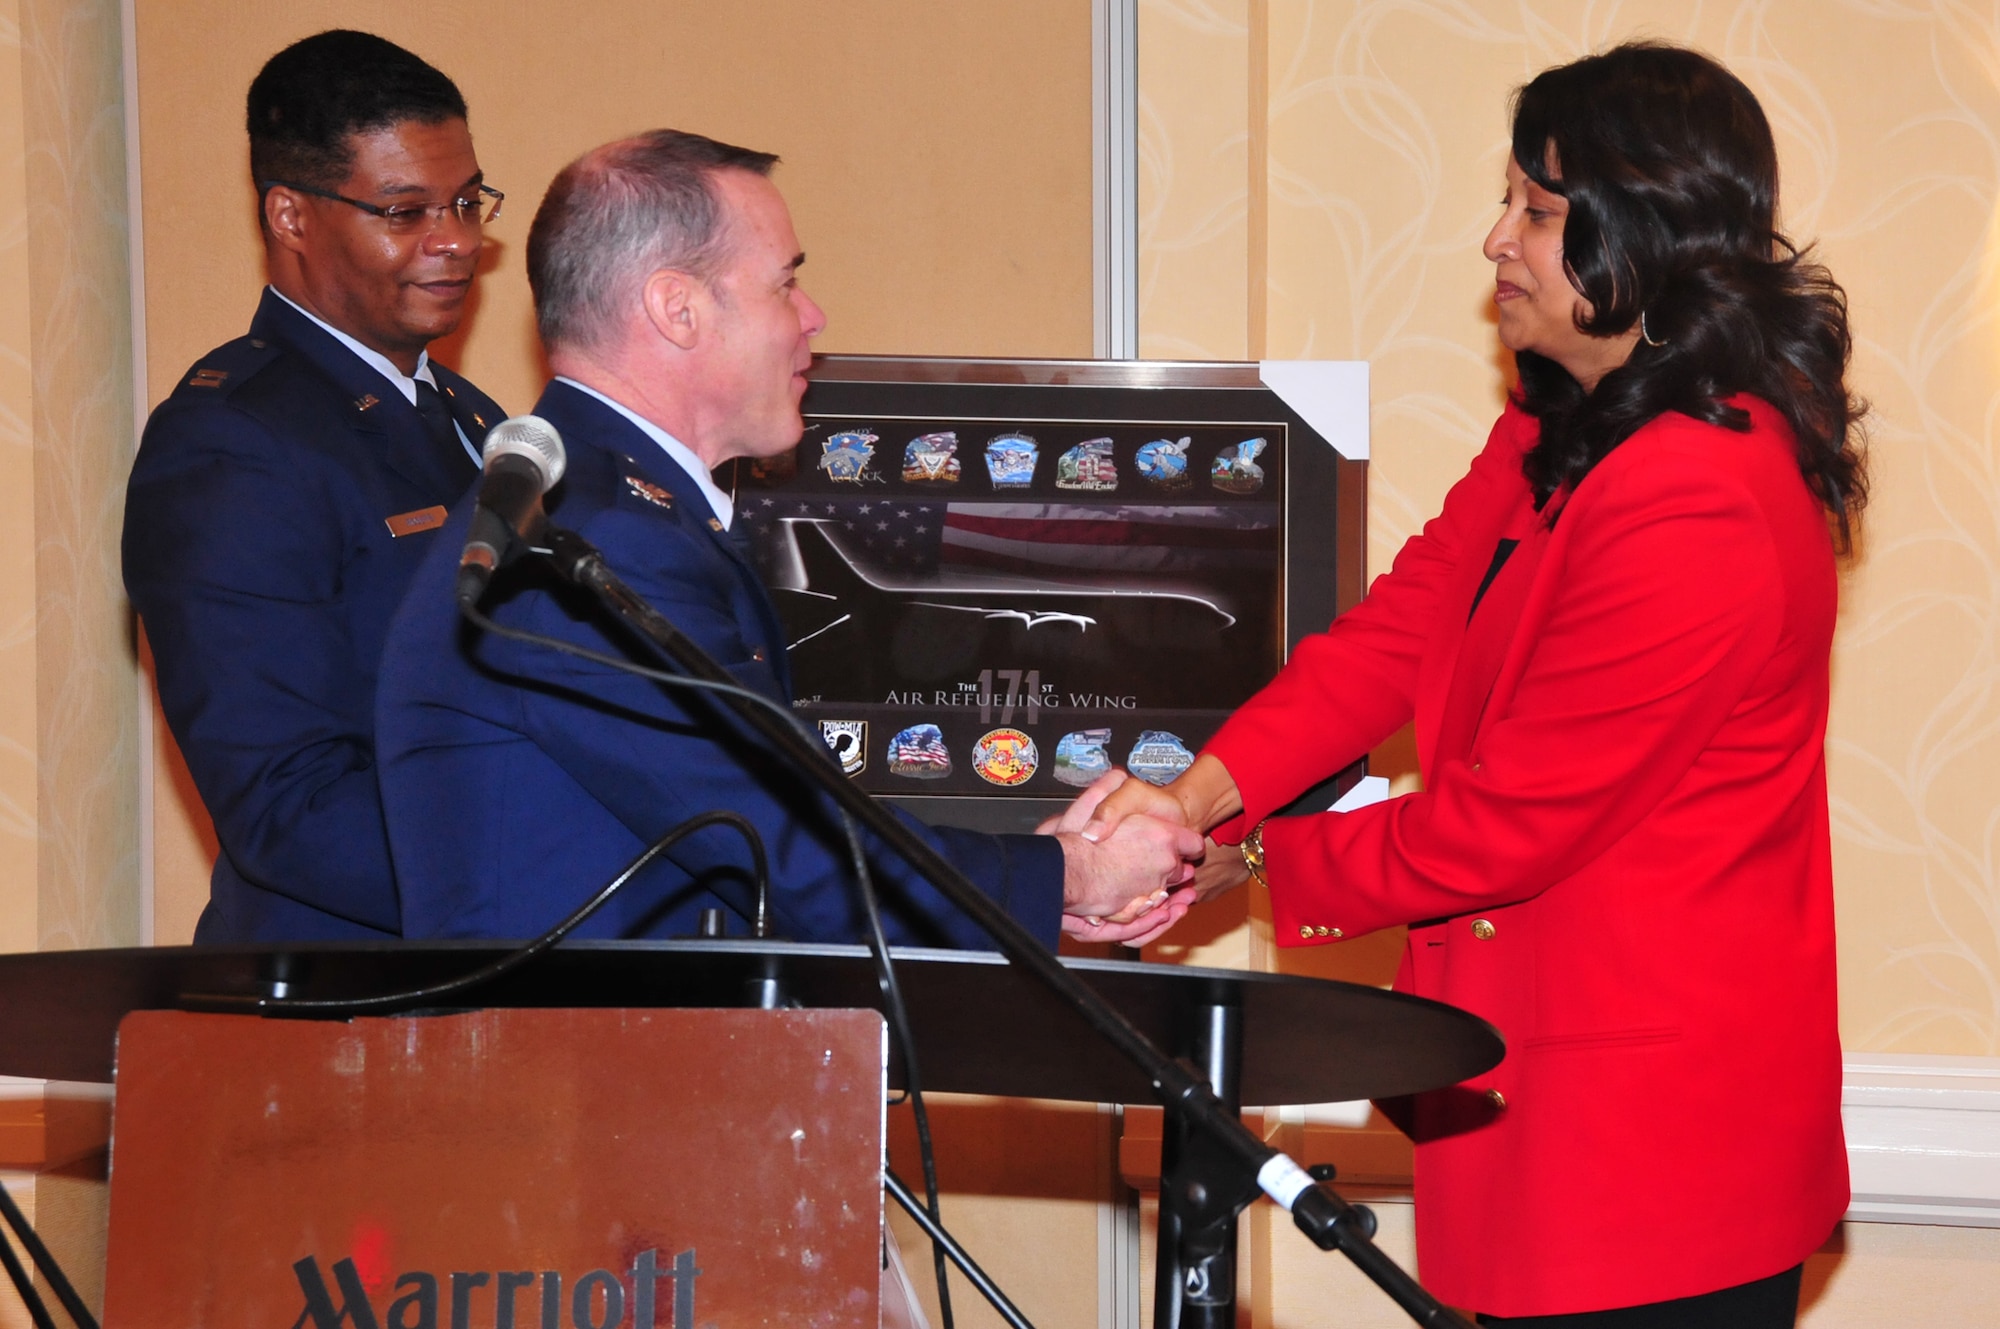 The 171st Air Refueling Wing hosts its 29th annual African-American Heritage Luncheon, February 24, at the Pittsburgh Airport Marriott, featuring the Principal Director of Space Launch Engineering and Acquisition, Space Systems Group at the Aerospace Corporation, Ms. Karolyn Young as their guest speaker. The event allows the unit to showcase its accomplishments while celebrating African-American History Month.  Invited guests, including high school principals, counselors, students and 171st unit members join together to celebrate this year's theme, "Black Women in American History and Culture."  (National Guard photo by Master Sgt. Ann Young) (Released by Capt. Dicie Hritz)
